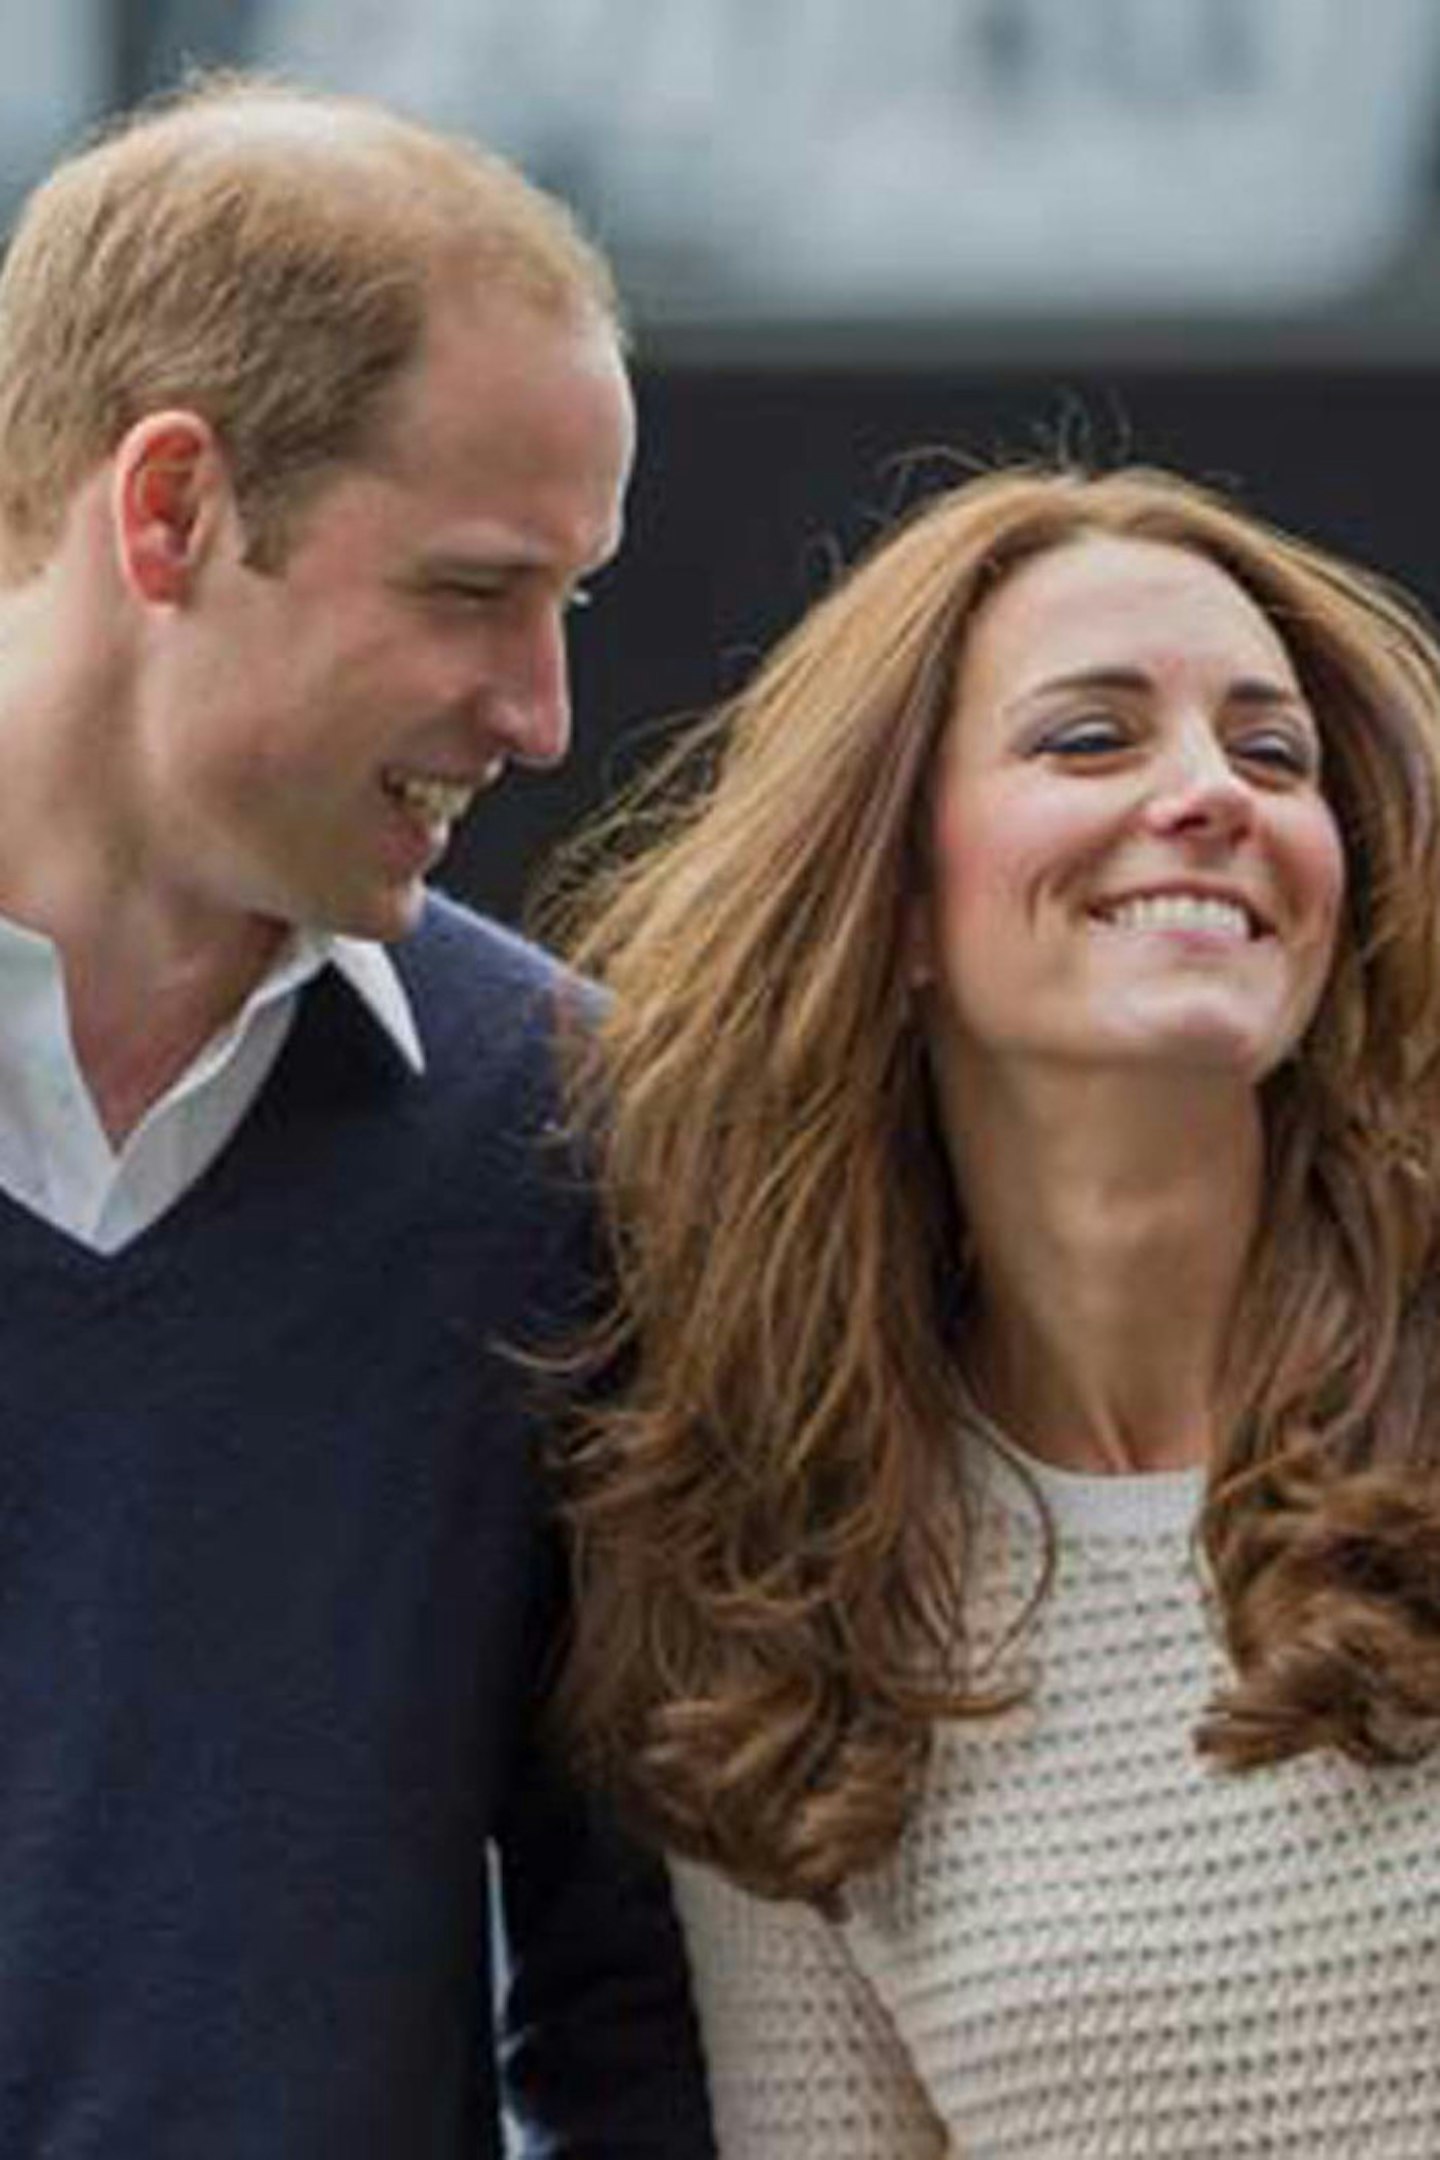 58-57. Prince William teases Kate about beating her team in a rugby game in Dunedin, New Zealand